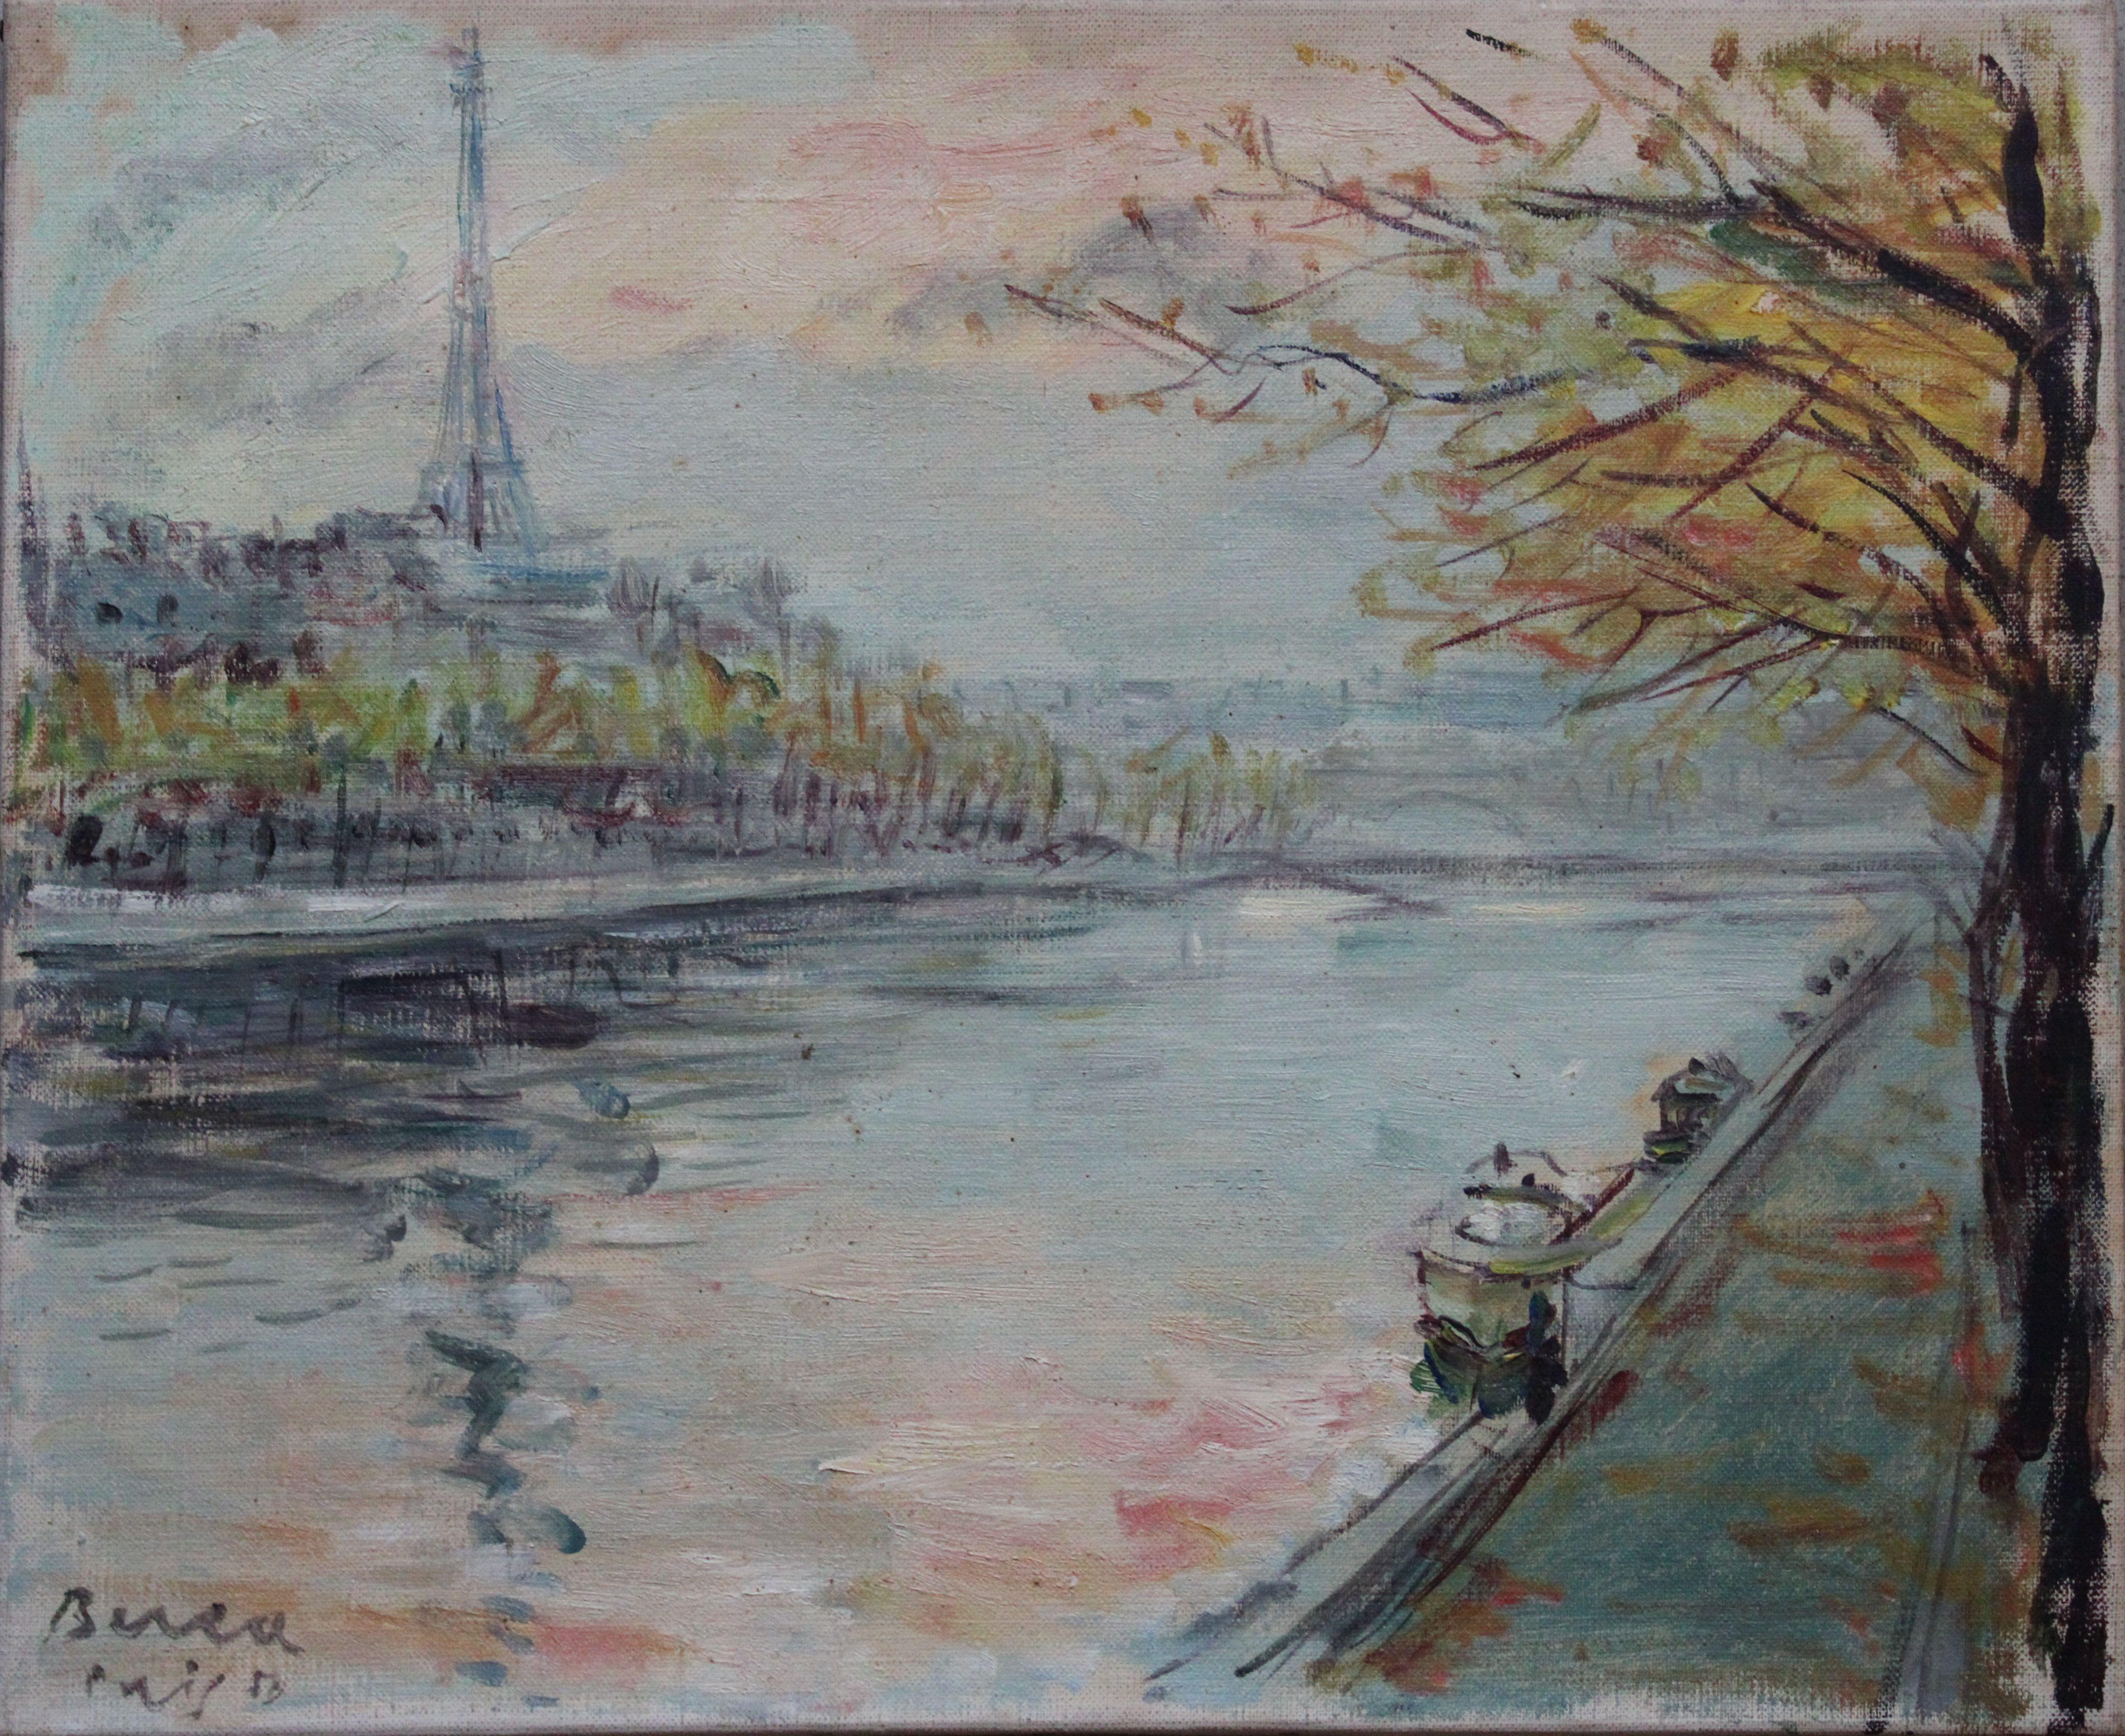 Paris, the docks and the Eiffel Tower Oil on canvas 38x46 cm - Art by Dimitrie Berea